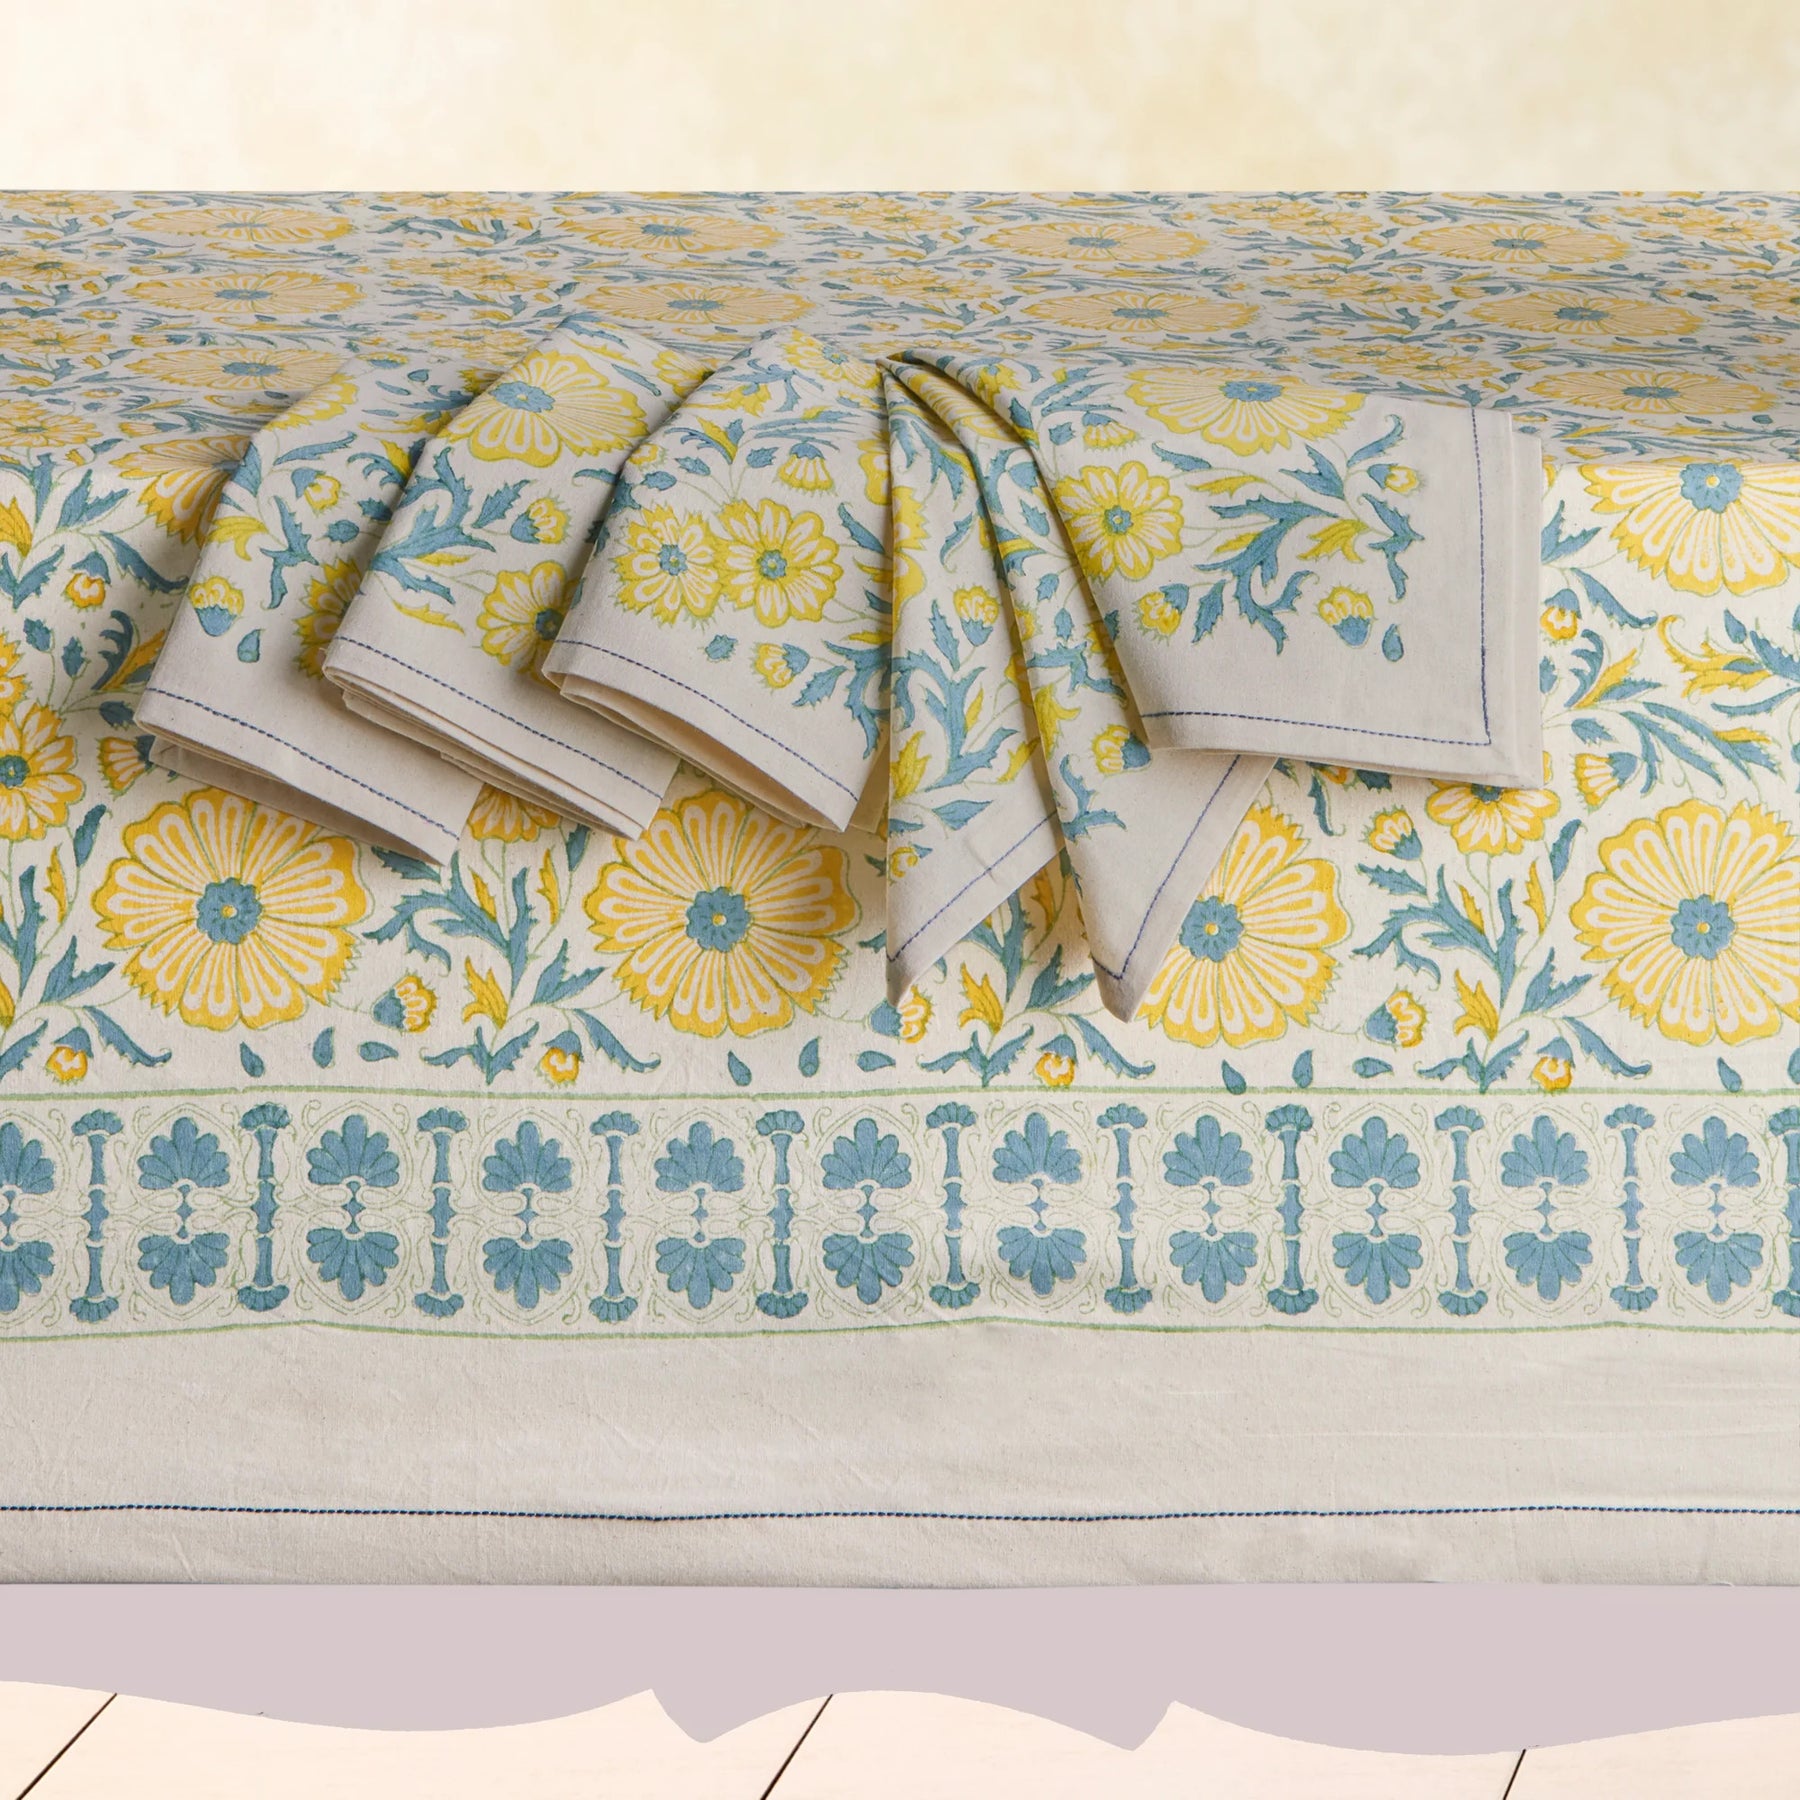 Sunny Flower Square Tablecloth